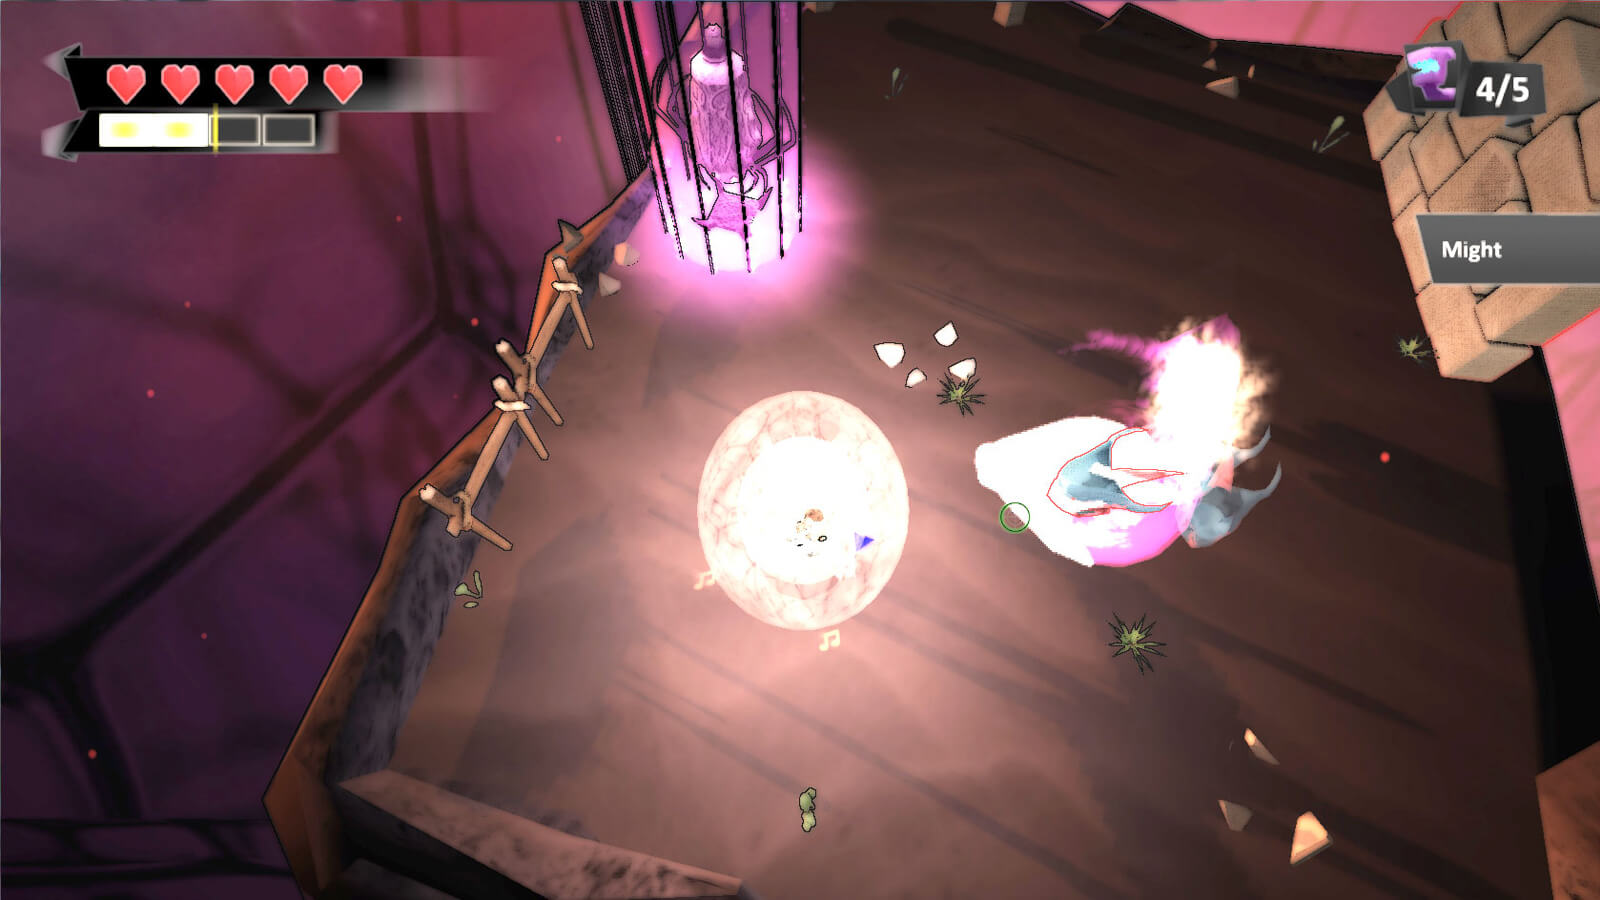 A glowing white sphere appears in the center of a floating platform. Two abstract glowing creatures stand nearby.